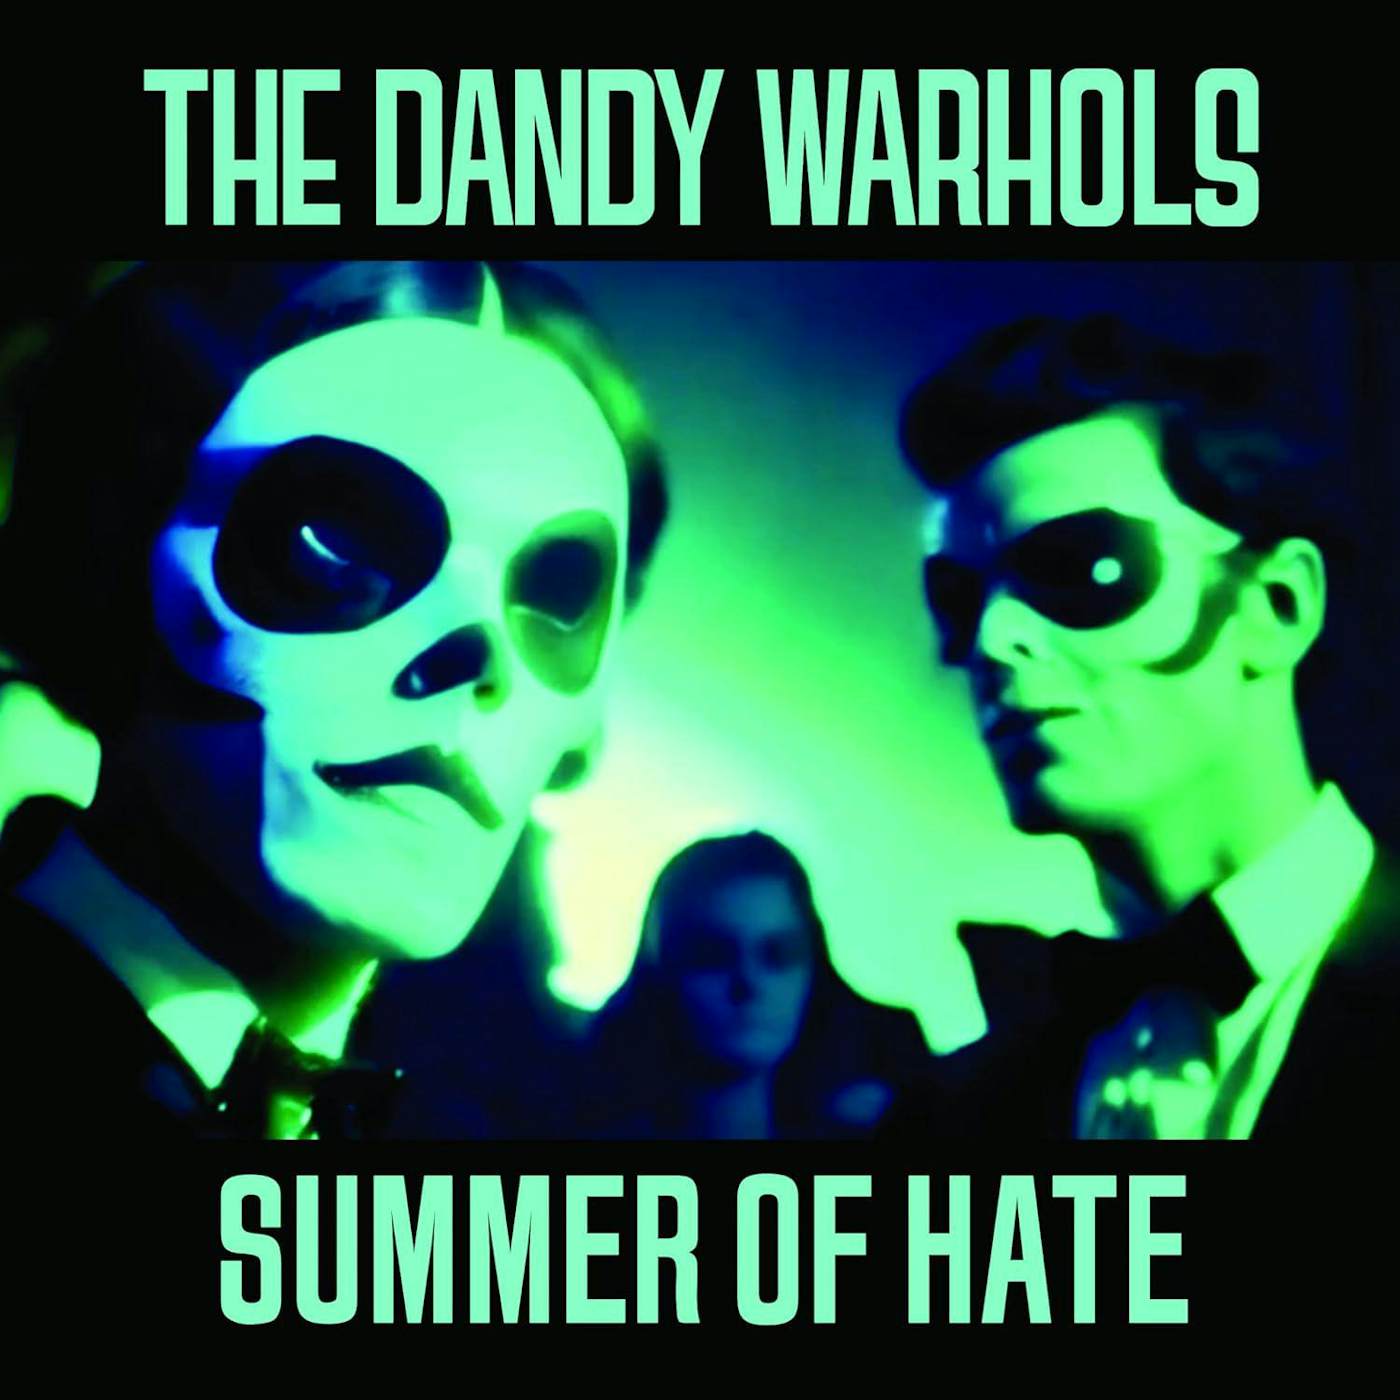 The Dandy Warhols Summer Of Hate / Love Song (7" Single) Vinyl Record